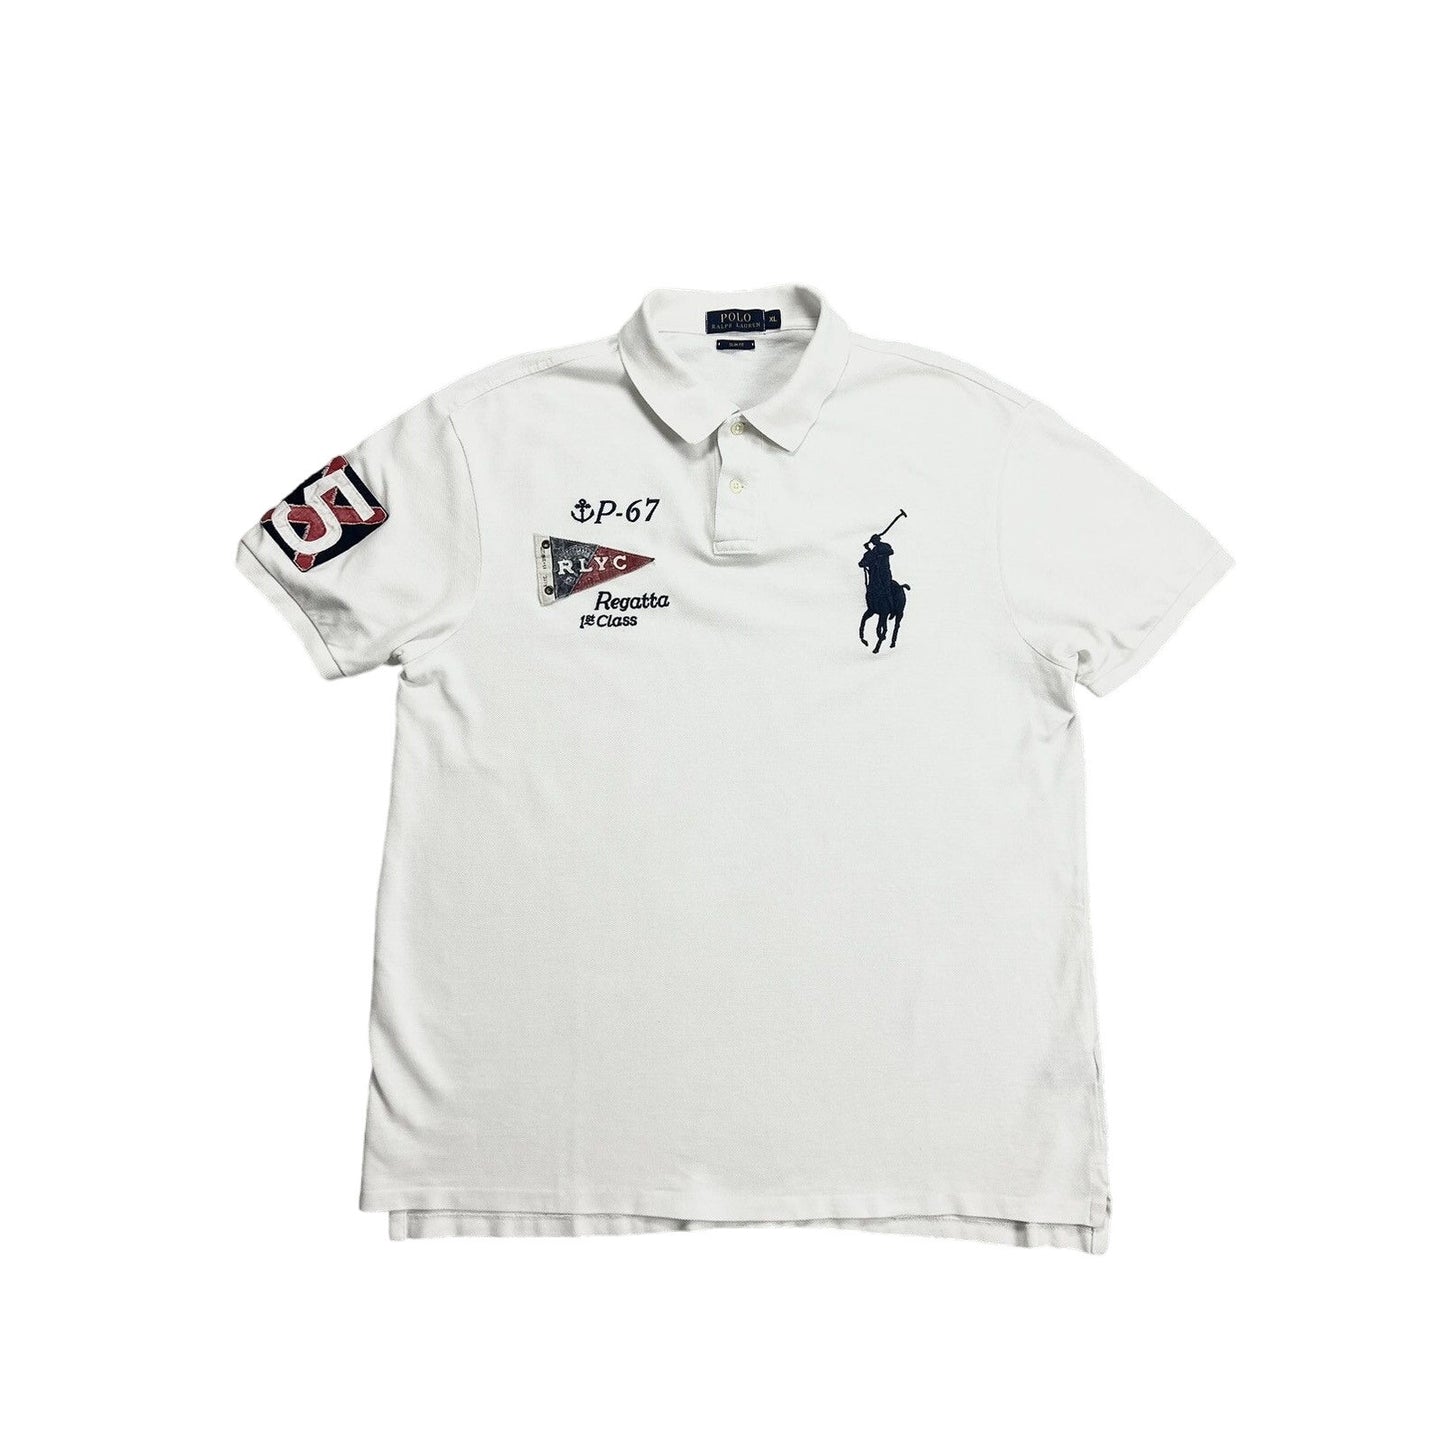 Chief Keef Polo Ralph Lauren vintage white polo big pony